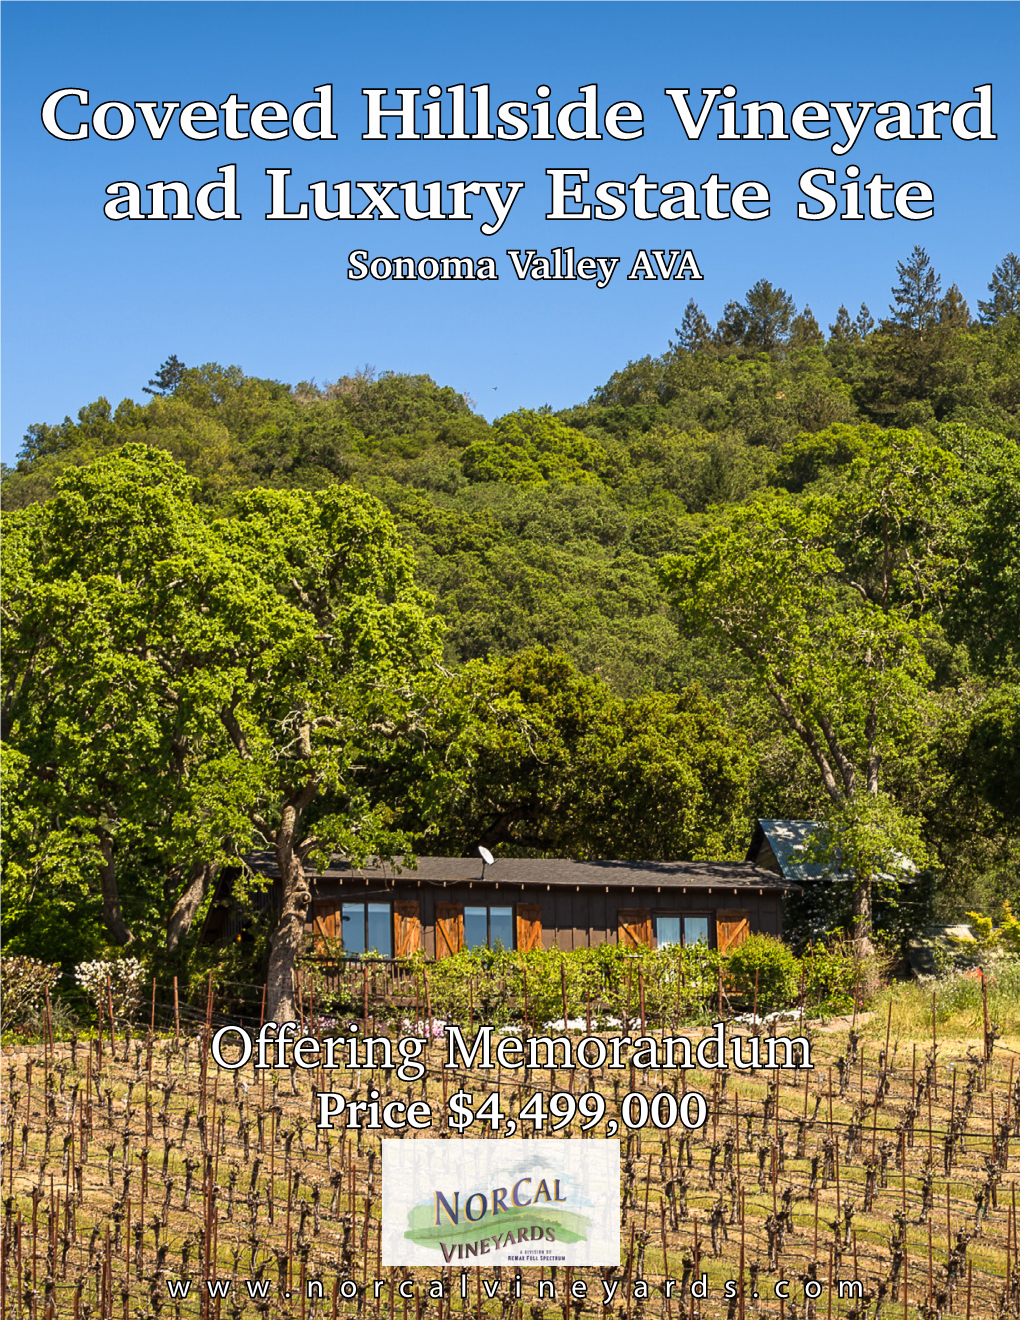 Coveted Hillside Vineyard and Luxury Estate Site Sonoma Valley AVA